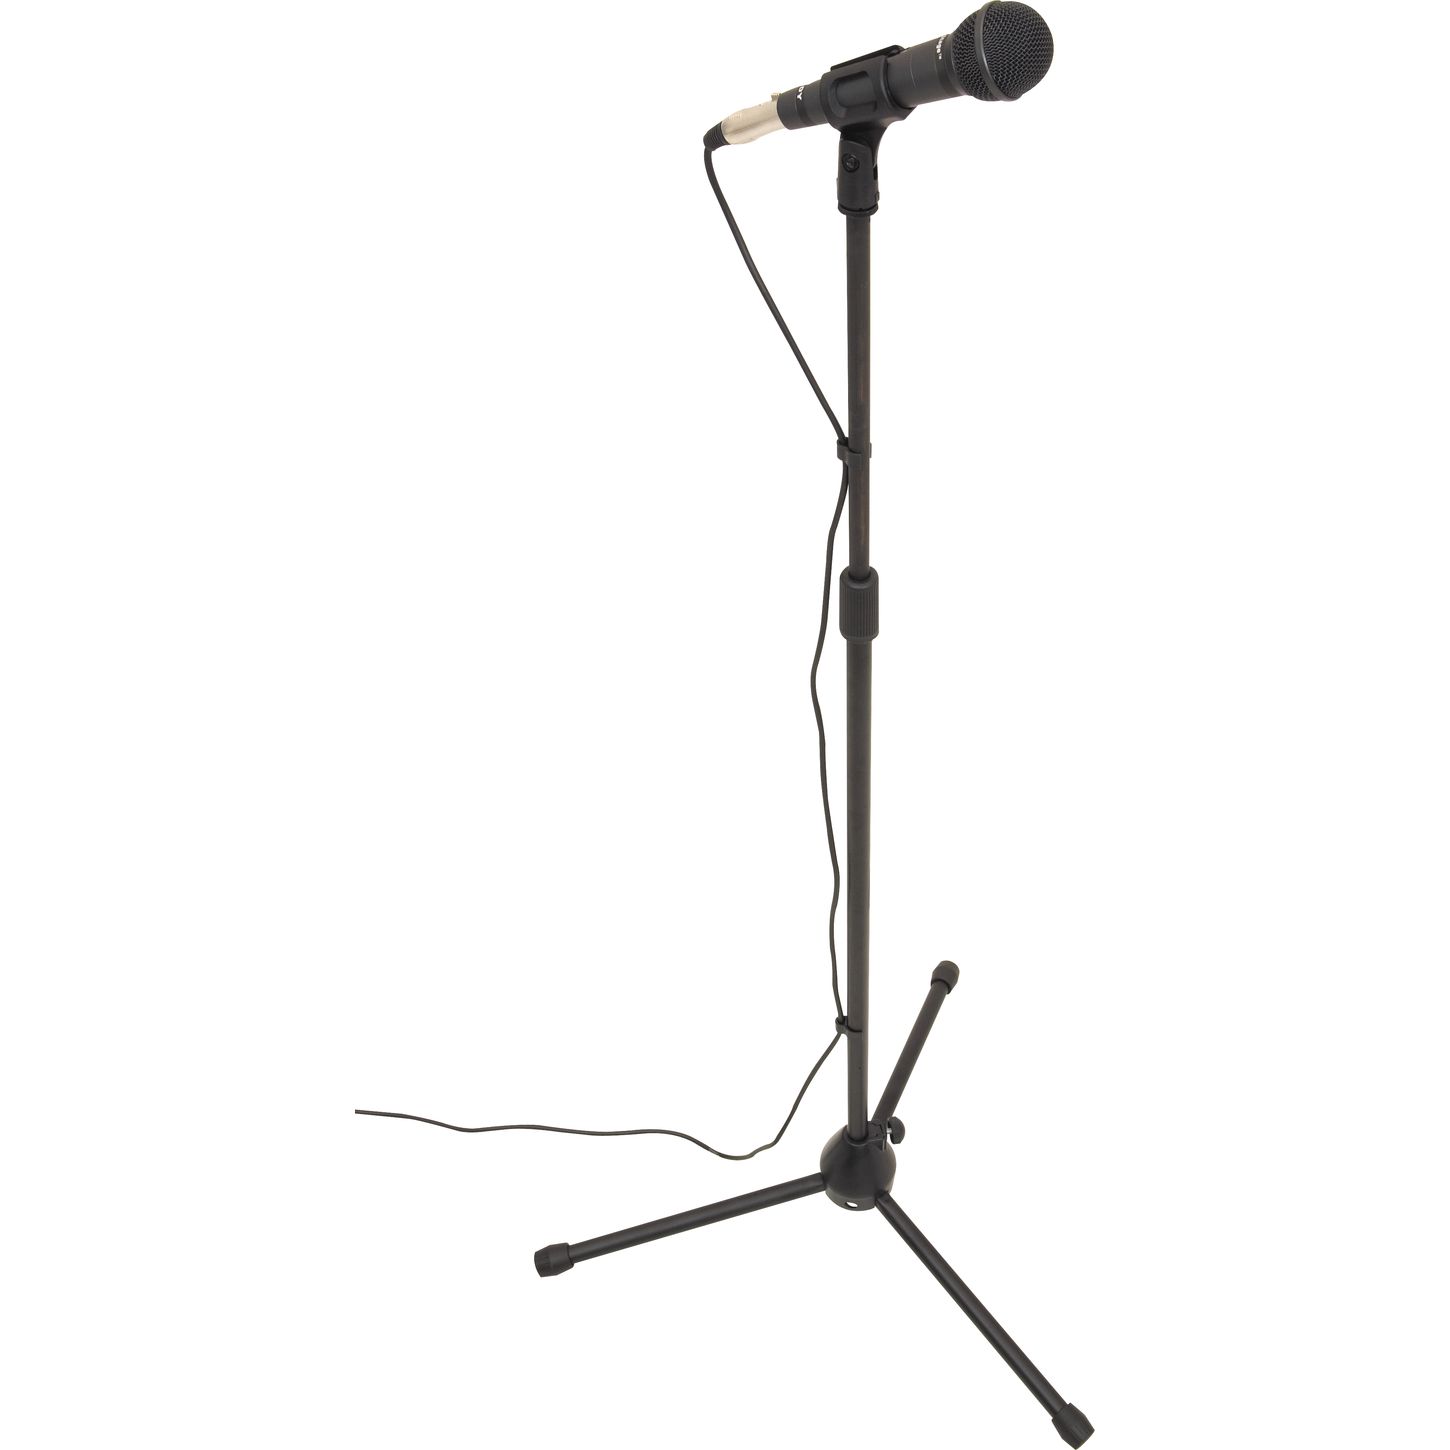 Included Vocal Mic And Stand